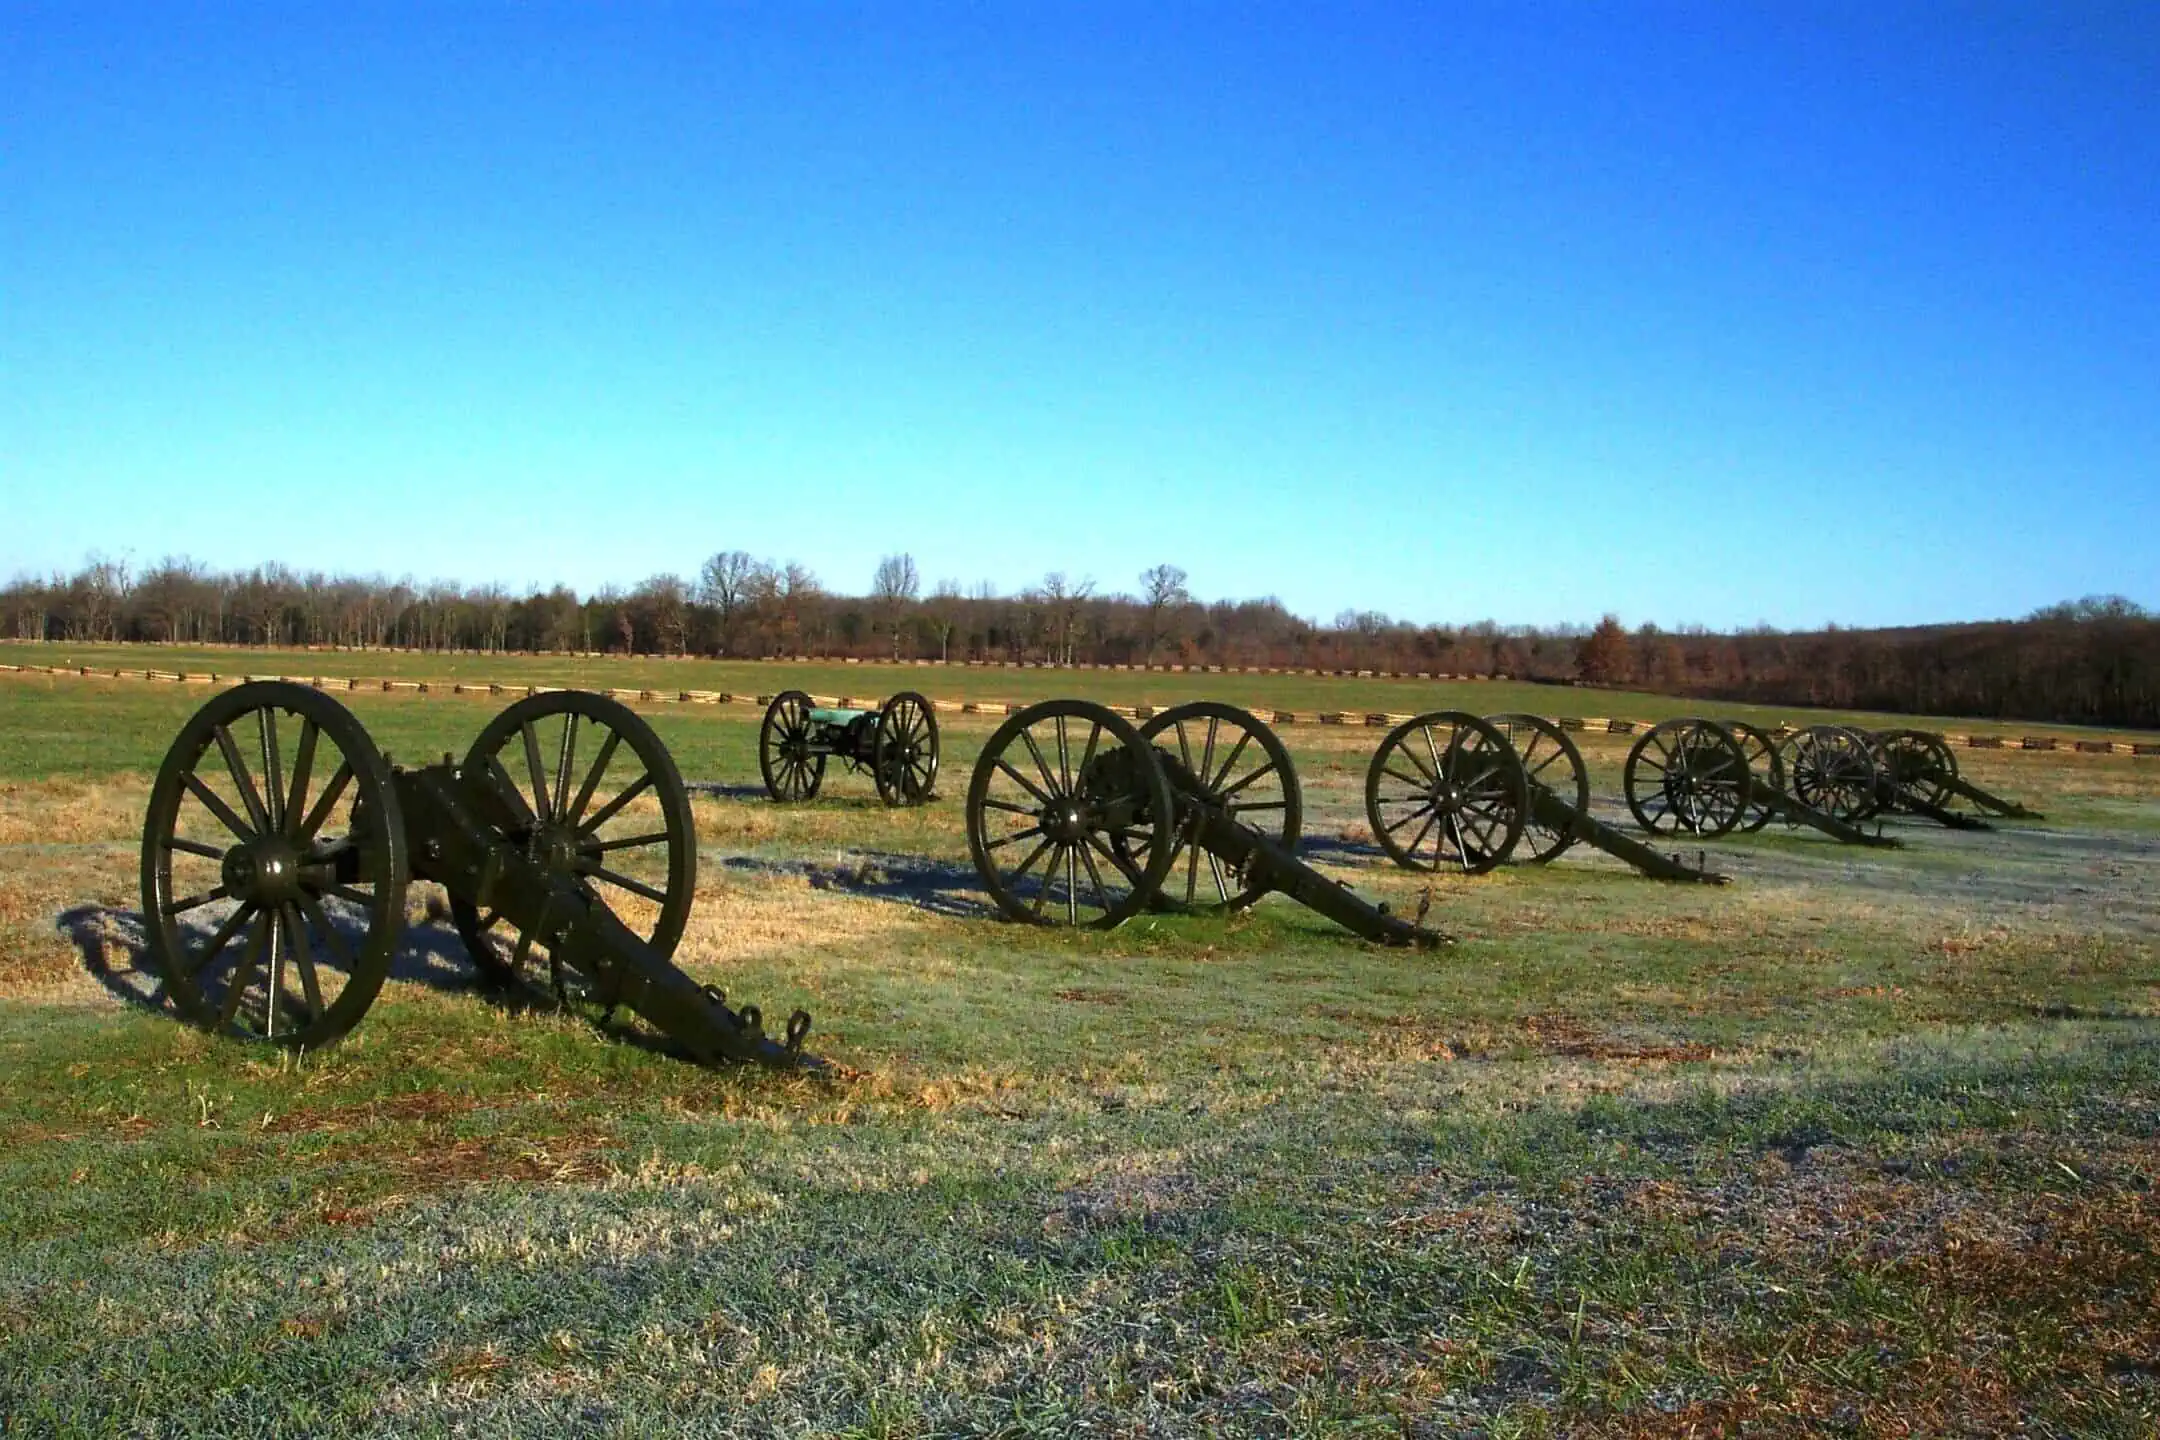 Multiple canons on display in a field at Pea Ridge